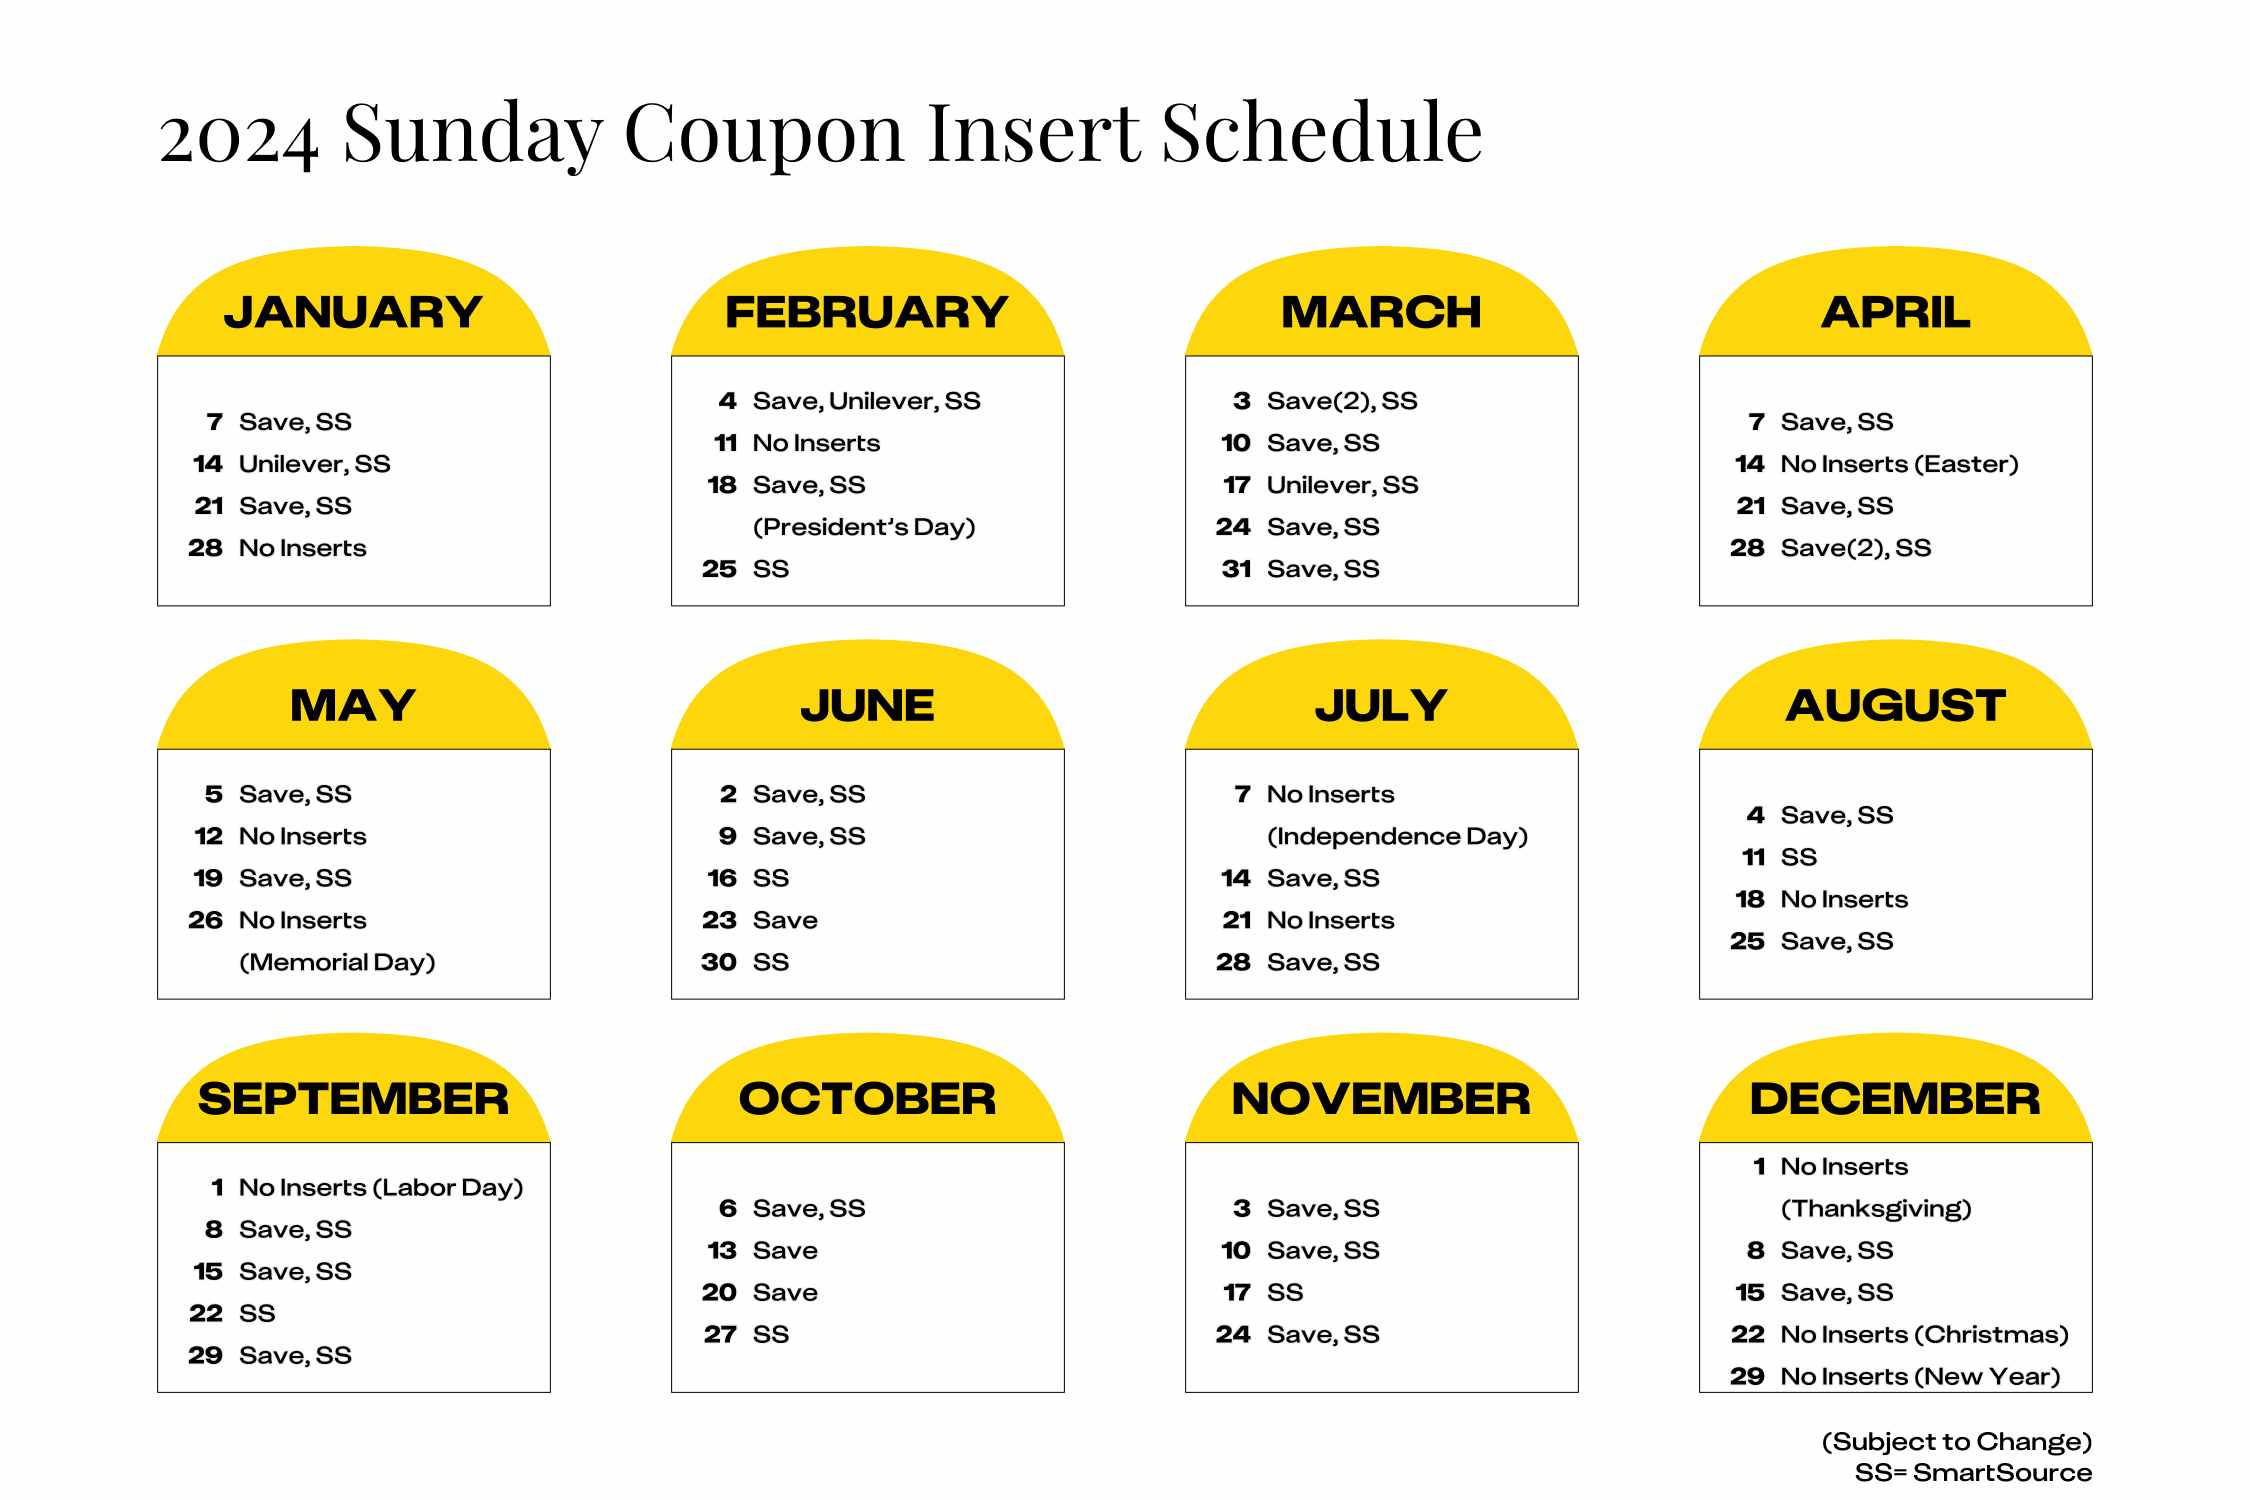 Printable Sunday Coupon Insert Schedule with dates.